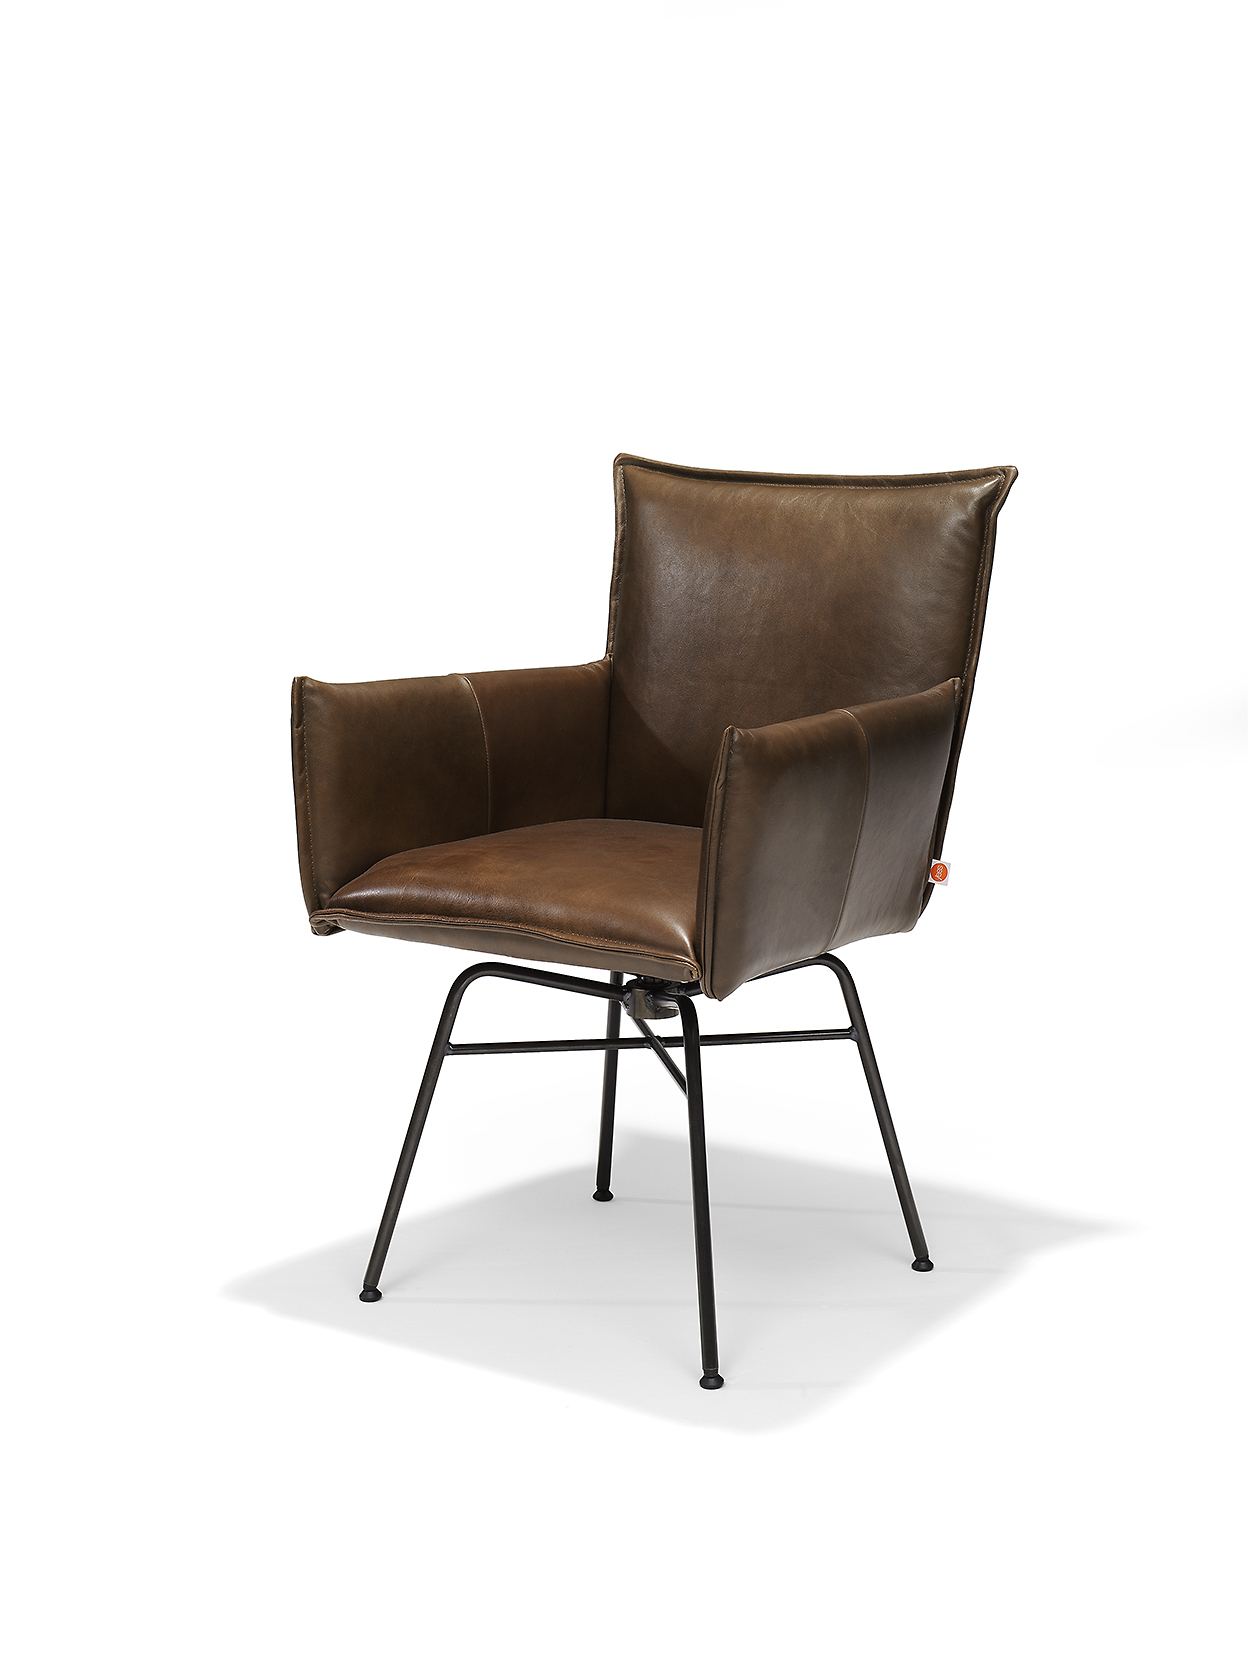 Sanne Swivel Chair With Arm Luxor Fango Pers LR